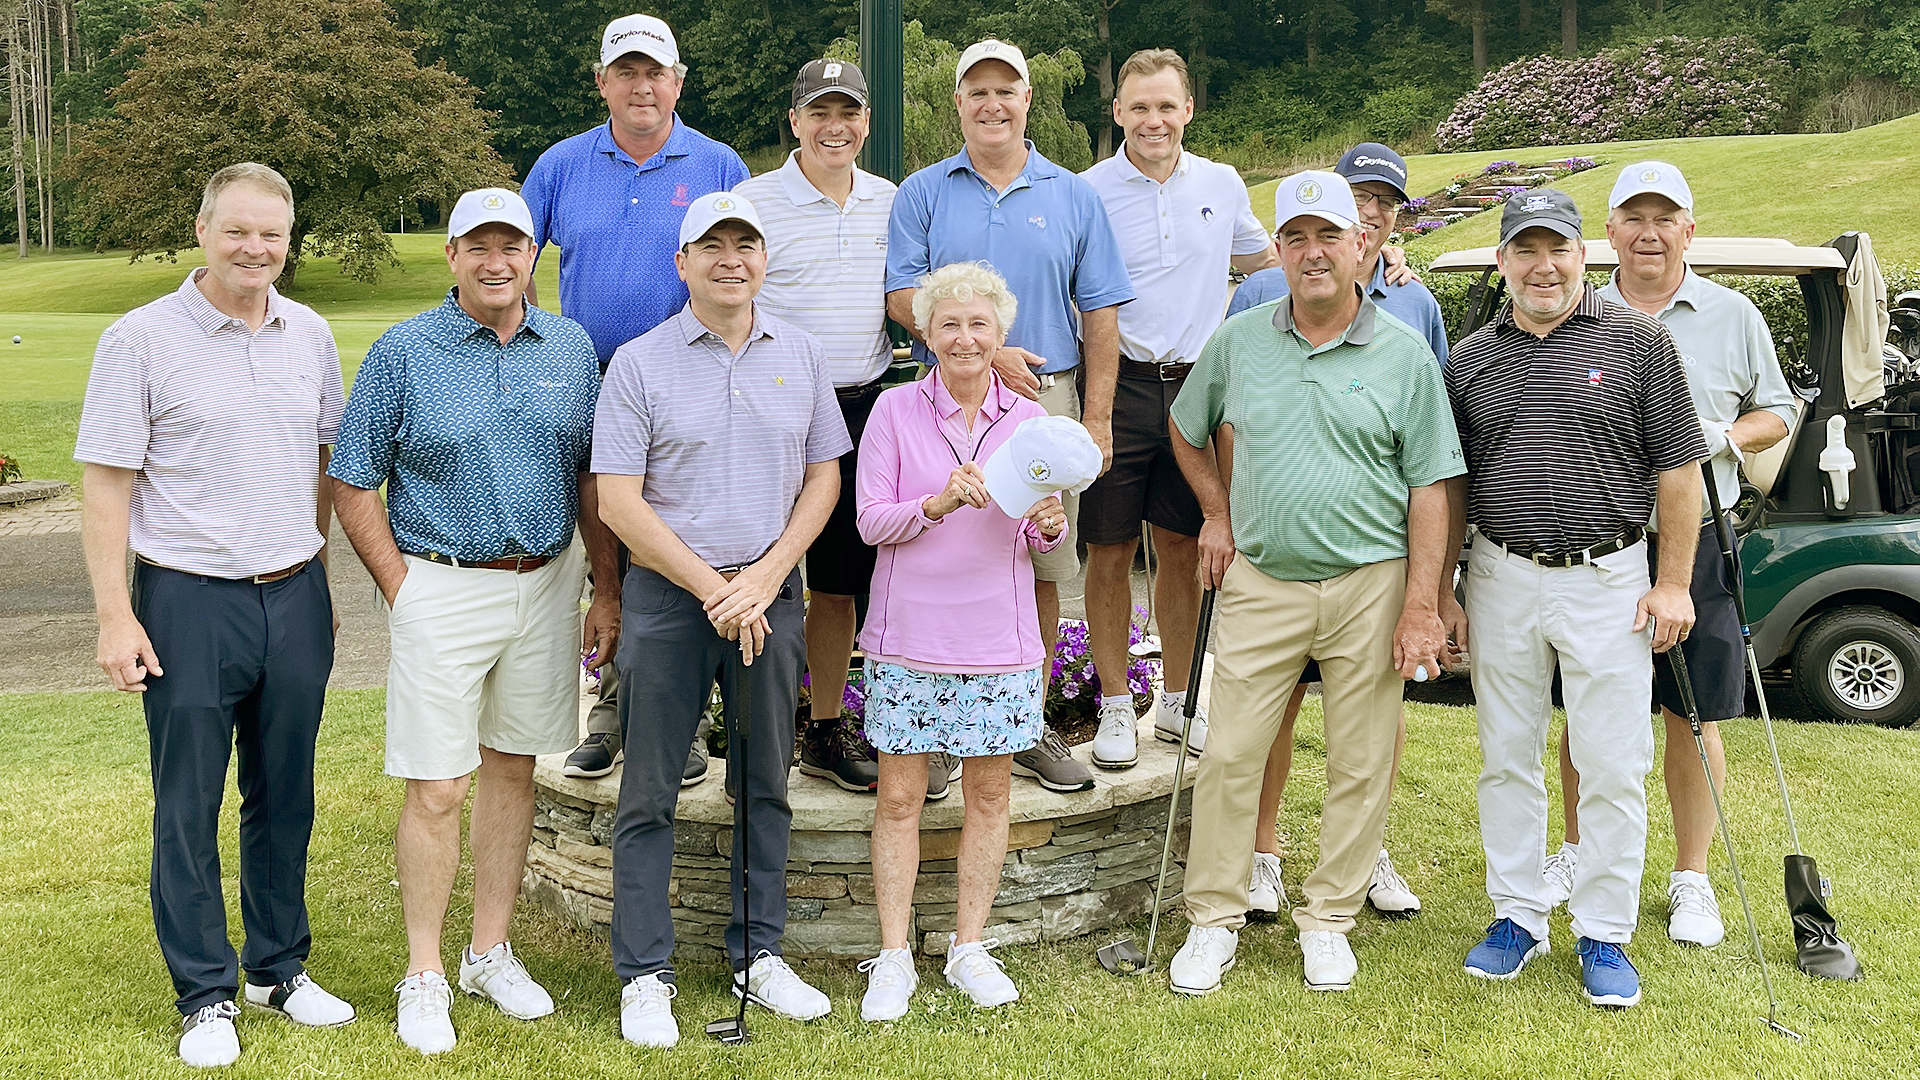 From Left to Right:  Jim Devlin ’88, Gary Young ’88, John Delbonis ’88, Frank Clark ’88, Dave French ’89, Dr Kris Kennedy, Mike Diani ’87, Dave Olender ’90, John Rainone ’88, Mario Solari ’85, Rob McNeil ’88 and Mike McKenna ’86.